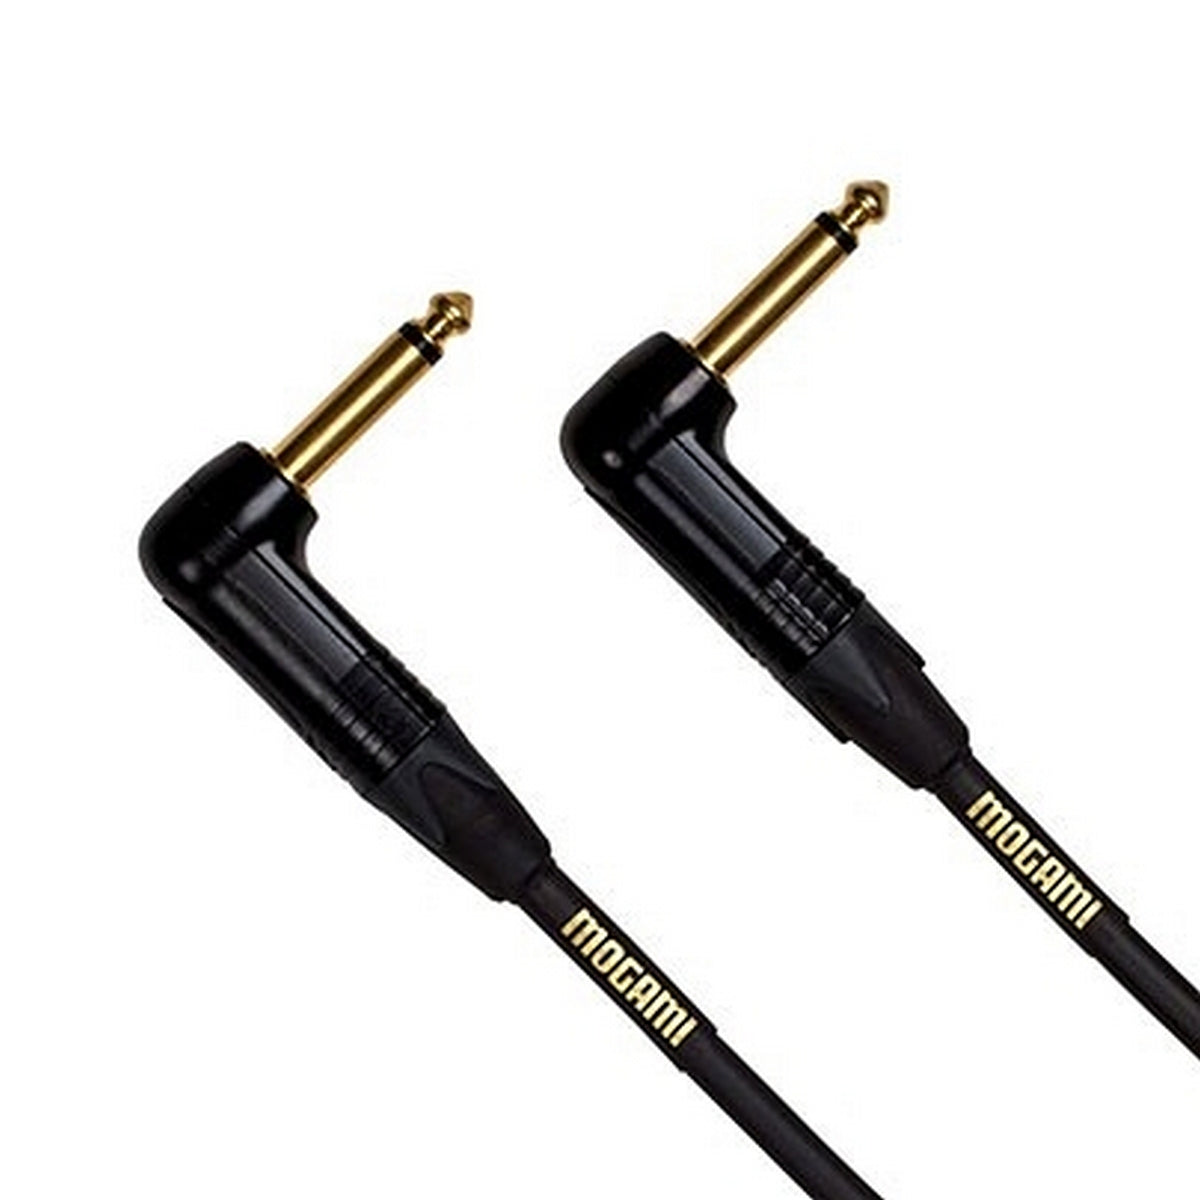 Mogami Gold Instrument 02RR High Clarity Guitar and Instrument Cable Right Angle Plug 2ft (Used)